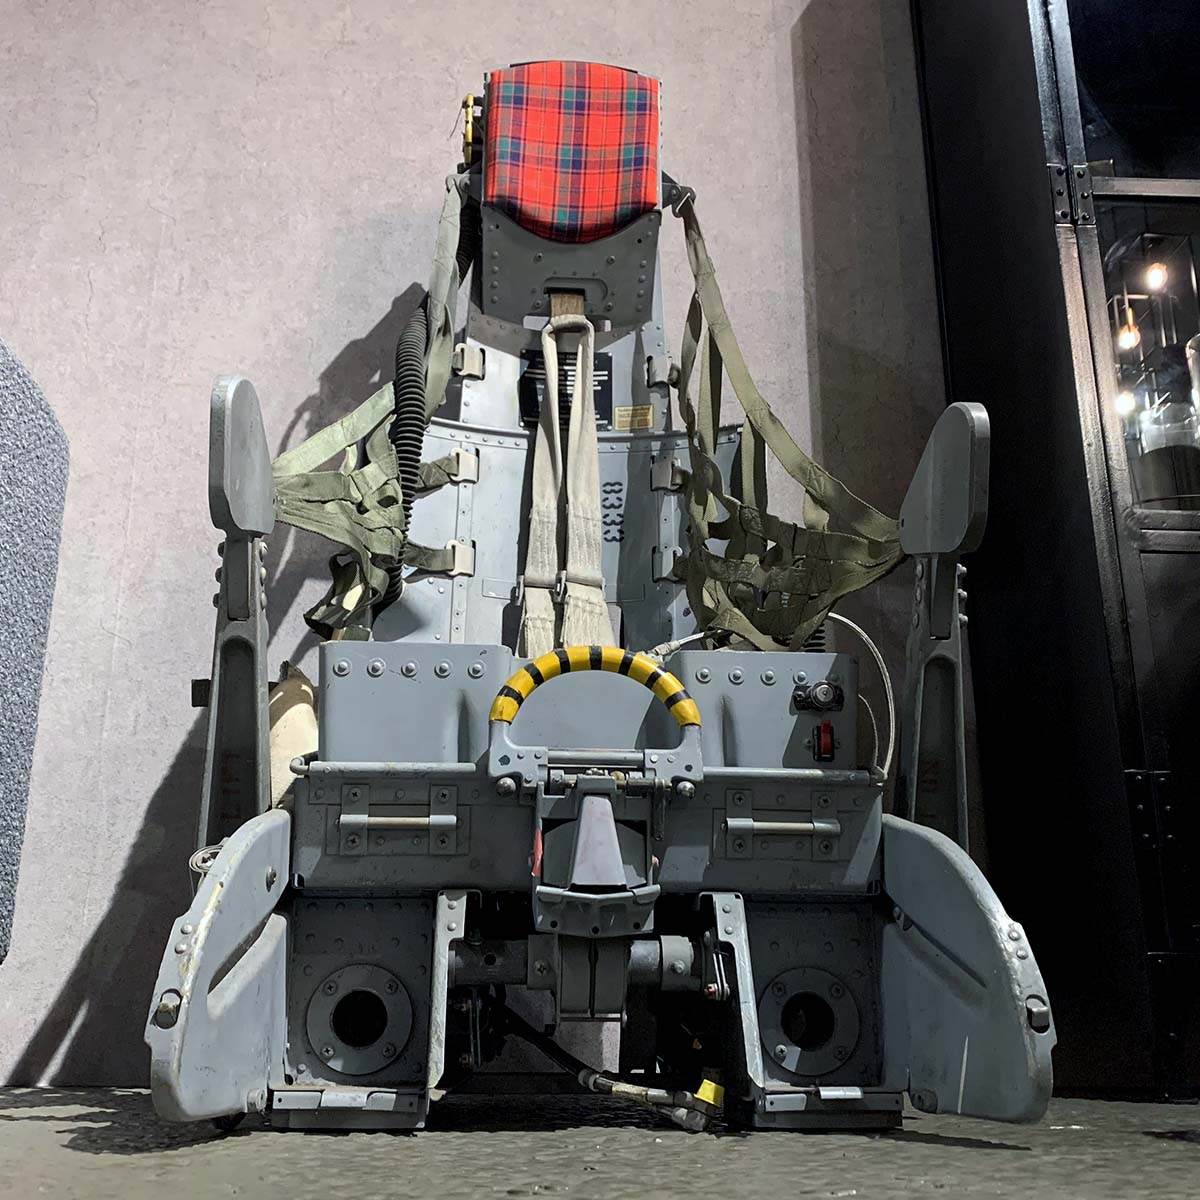 Lockheed C2 ejection seat, for the F-104 Starfighter, in use as a decorative piece in a living room.